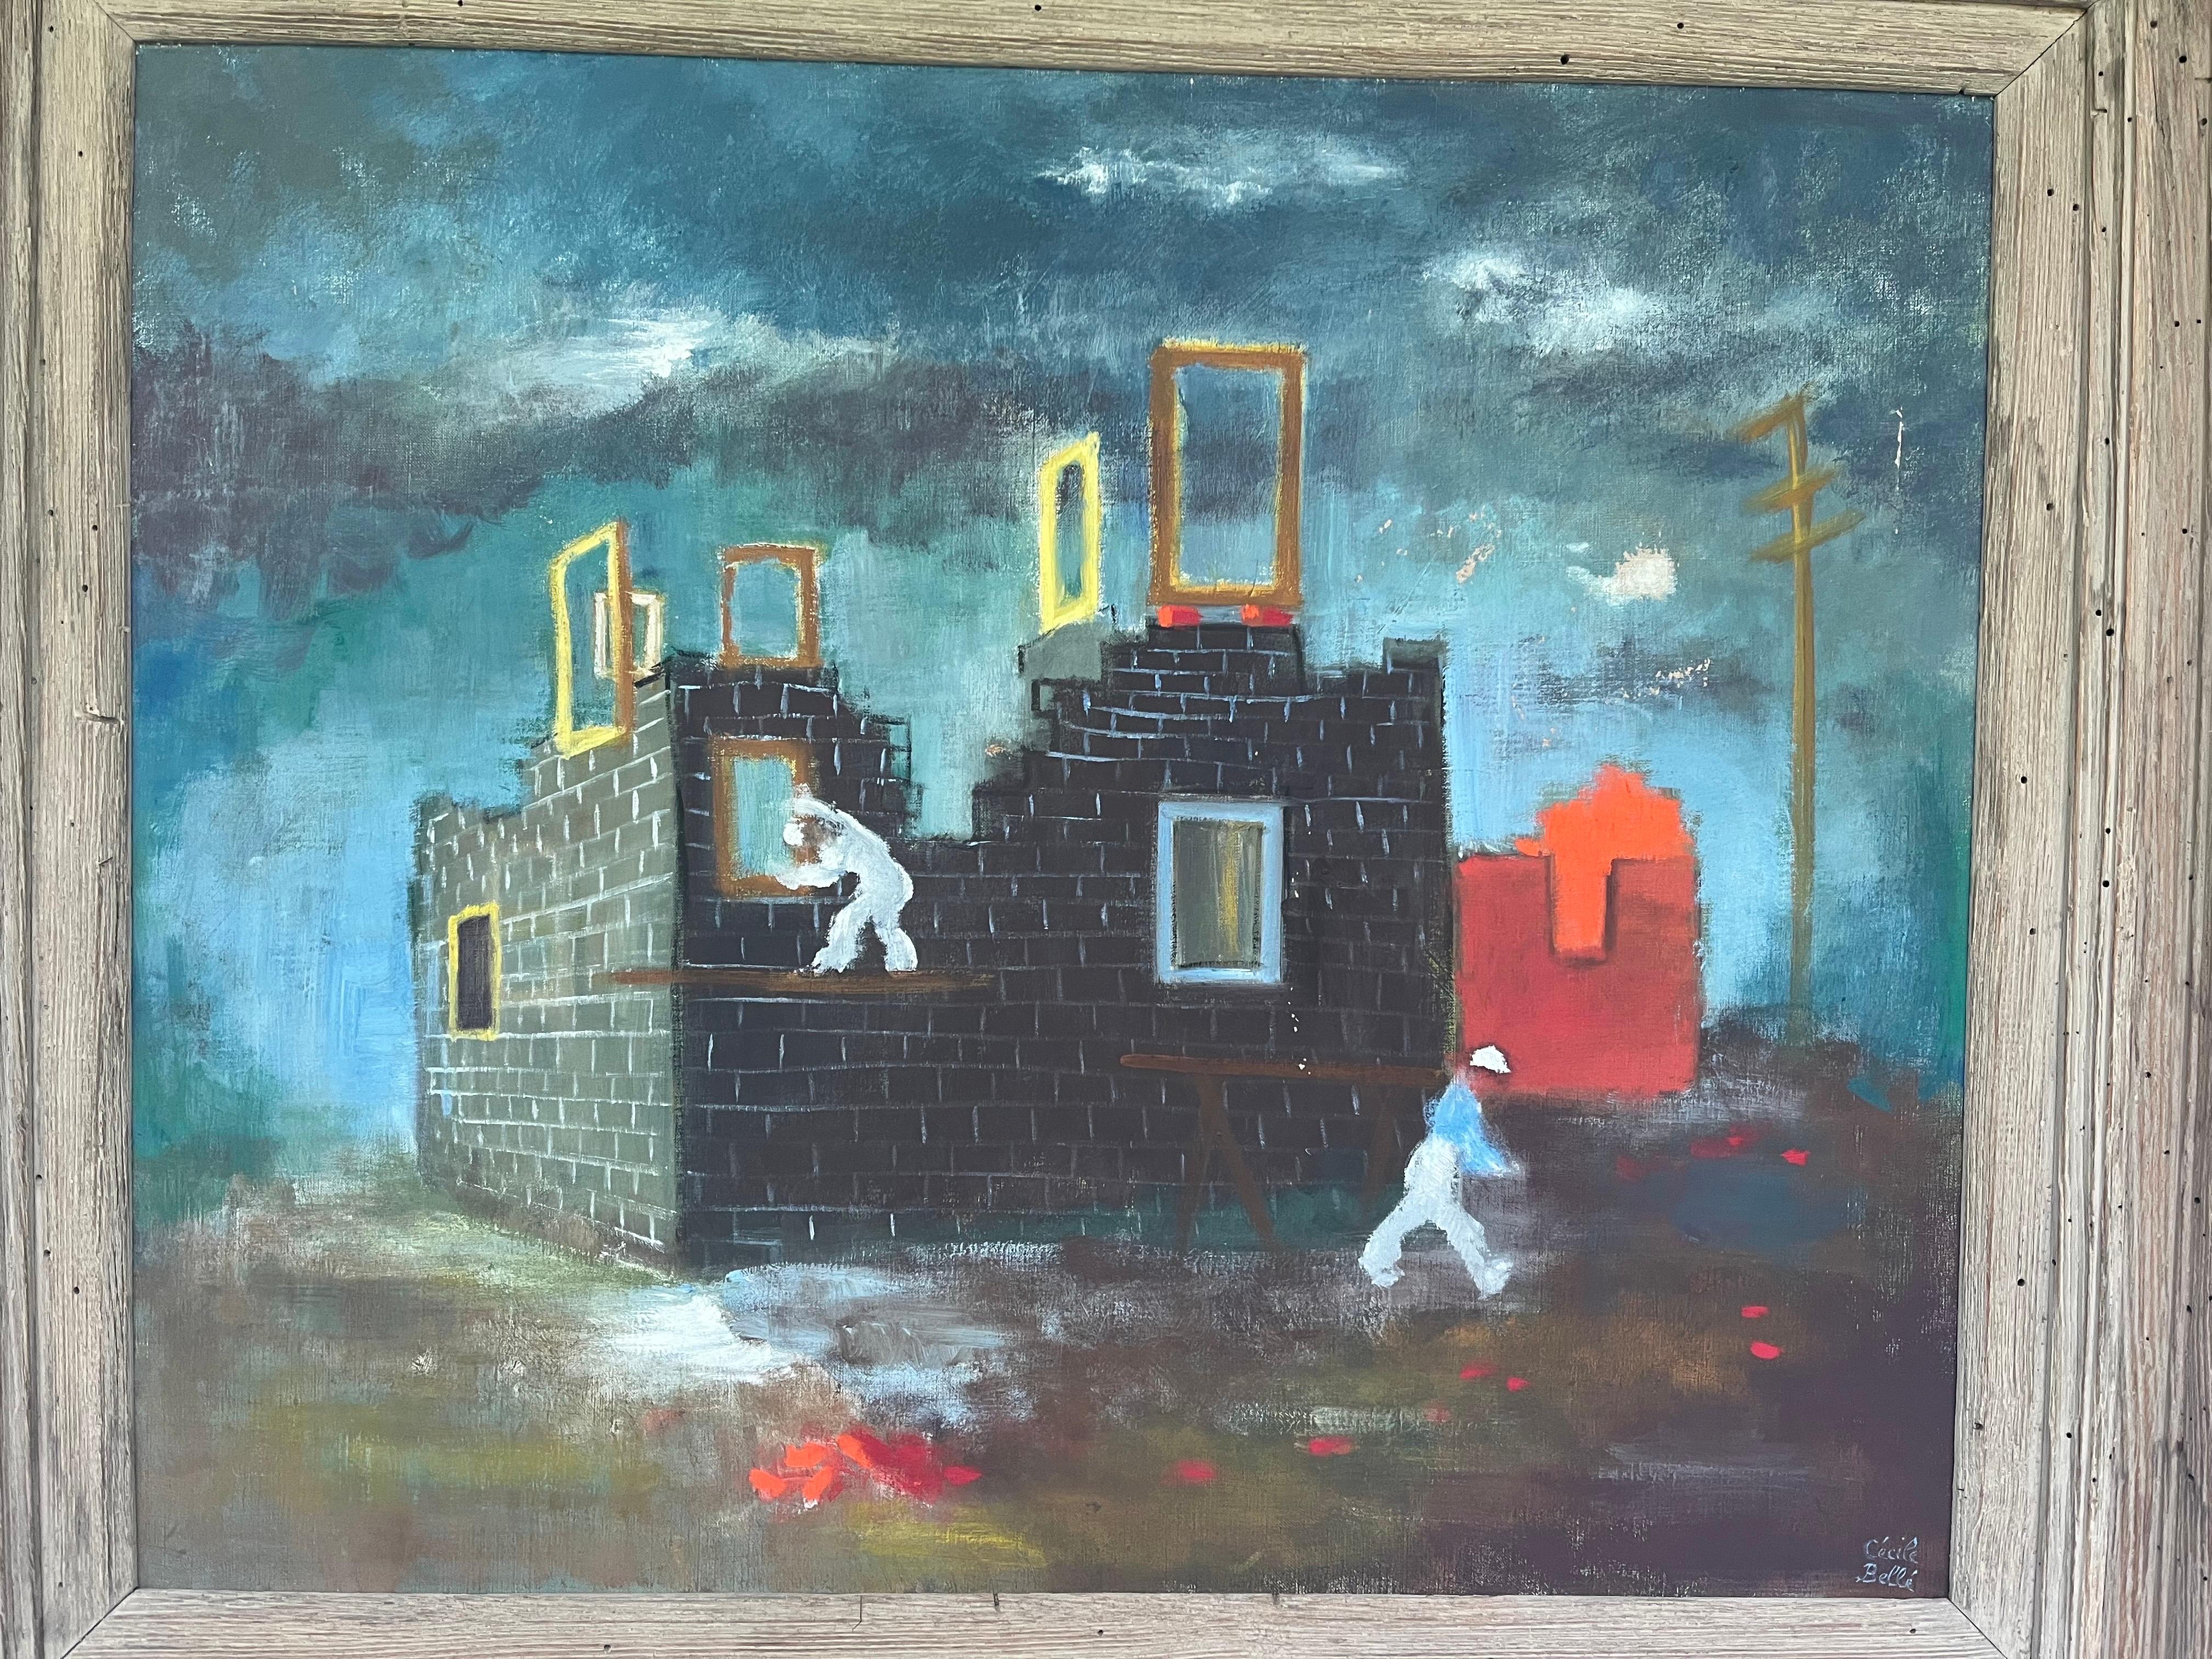 An American circa 1940’s WPA / surrealist style landscape painting by French American female artist Cecile Belle. The oil on canvas painting depicts the builders of a structure set amongst a sparse, urban, industrial landscape. The style is WPA and